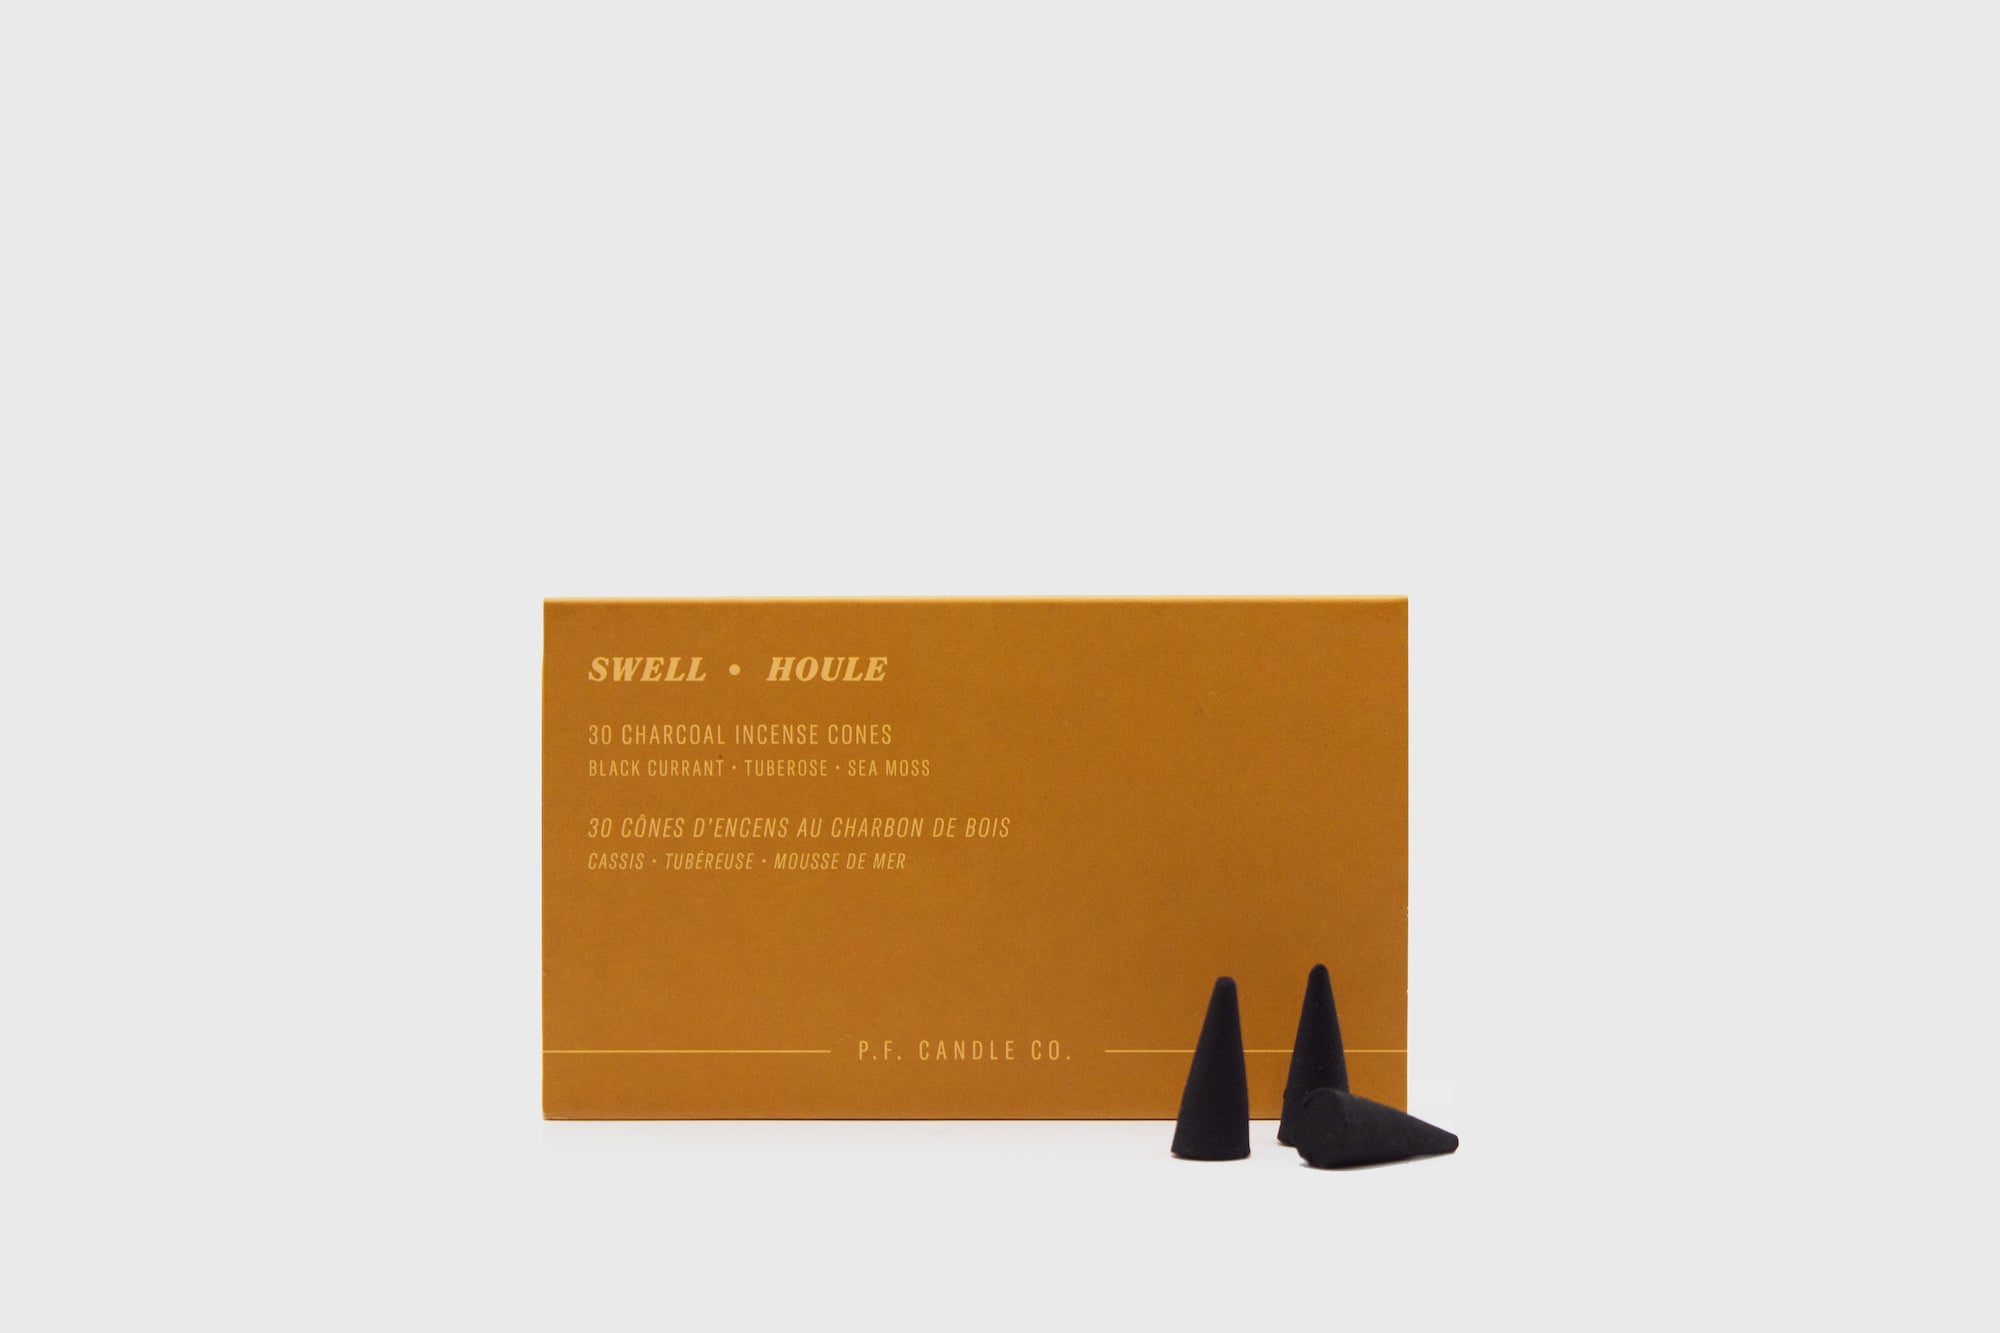 Sunset Incense Cones [Swell] Candles &amp; Home Fragrance [Homeware] P.F. Candle Co.    Deadstock General Store, Manchester